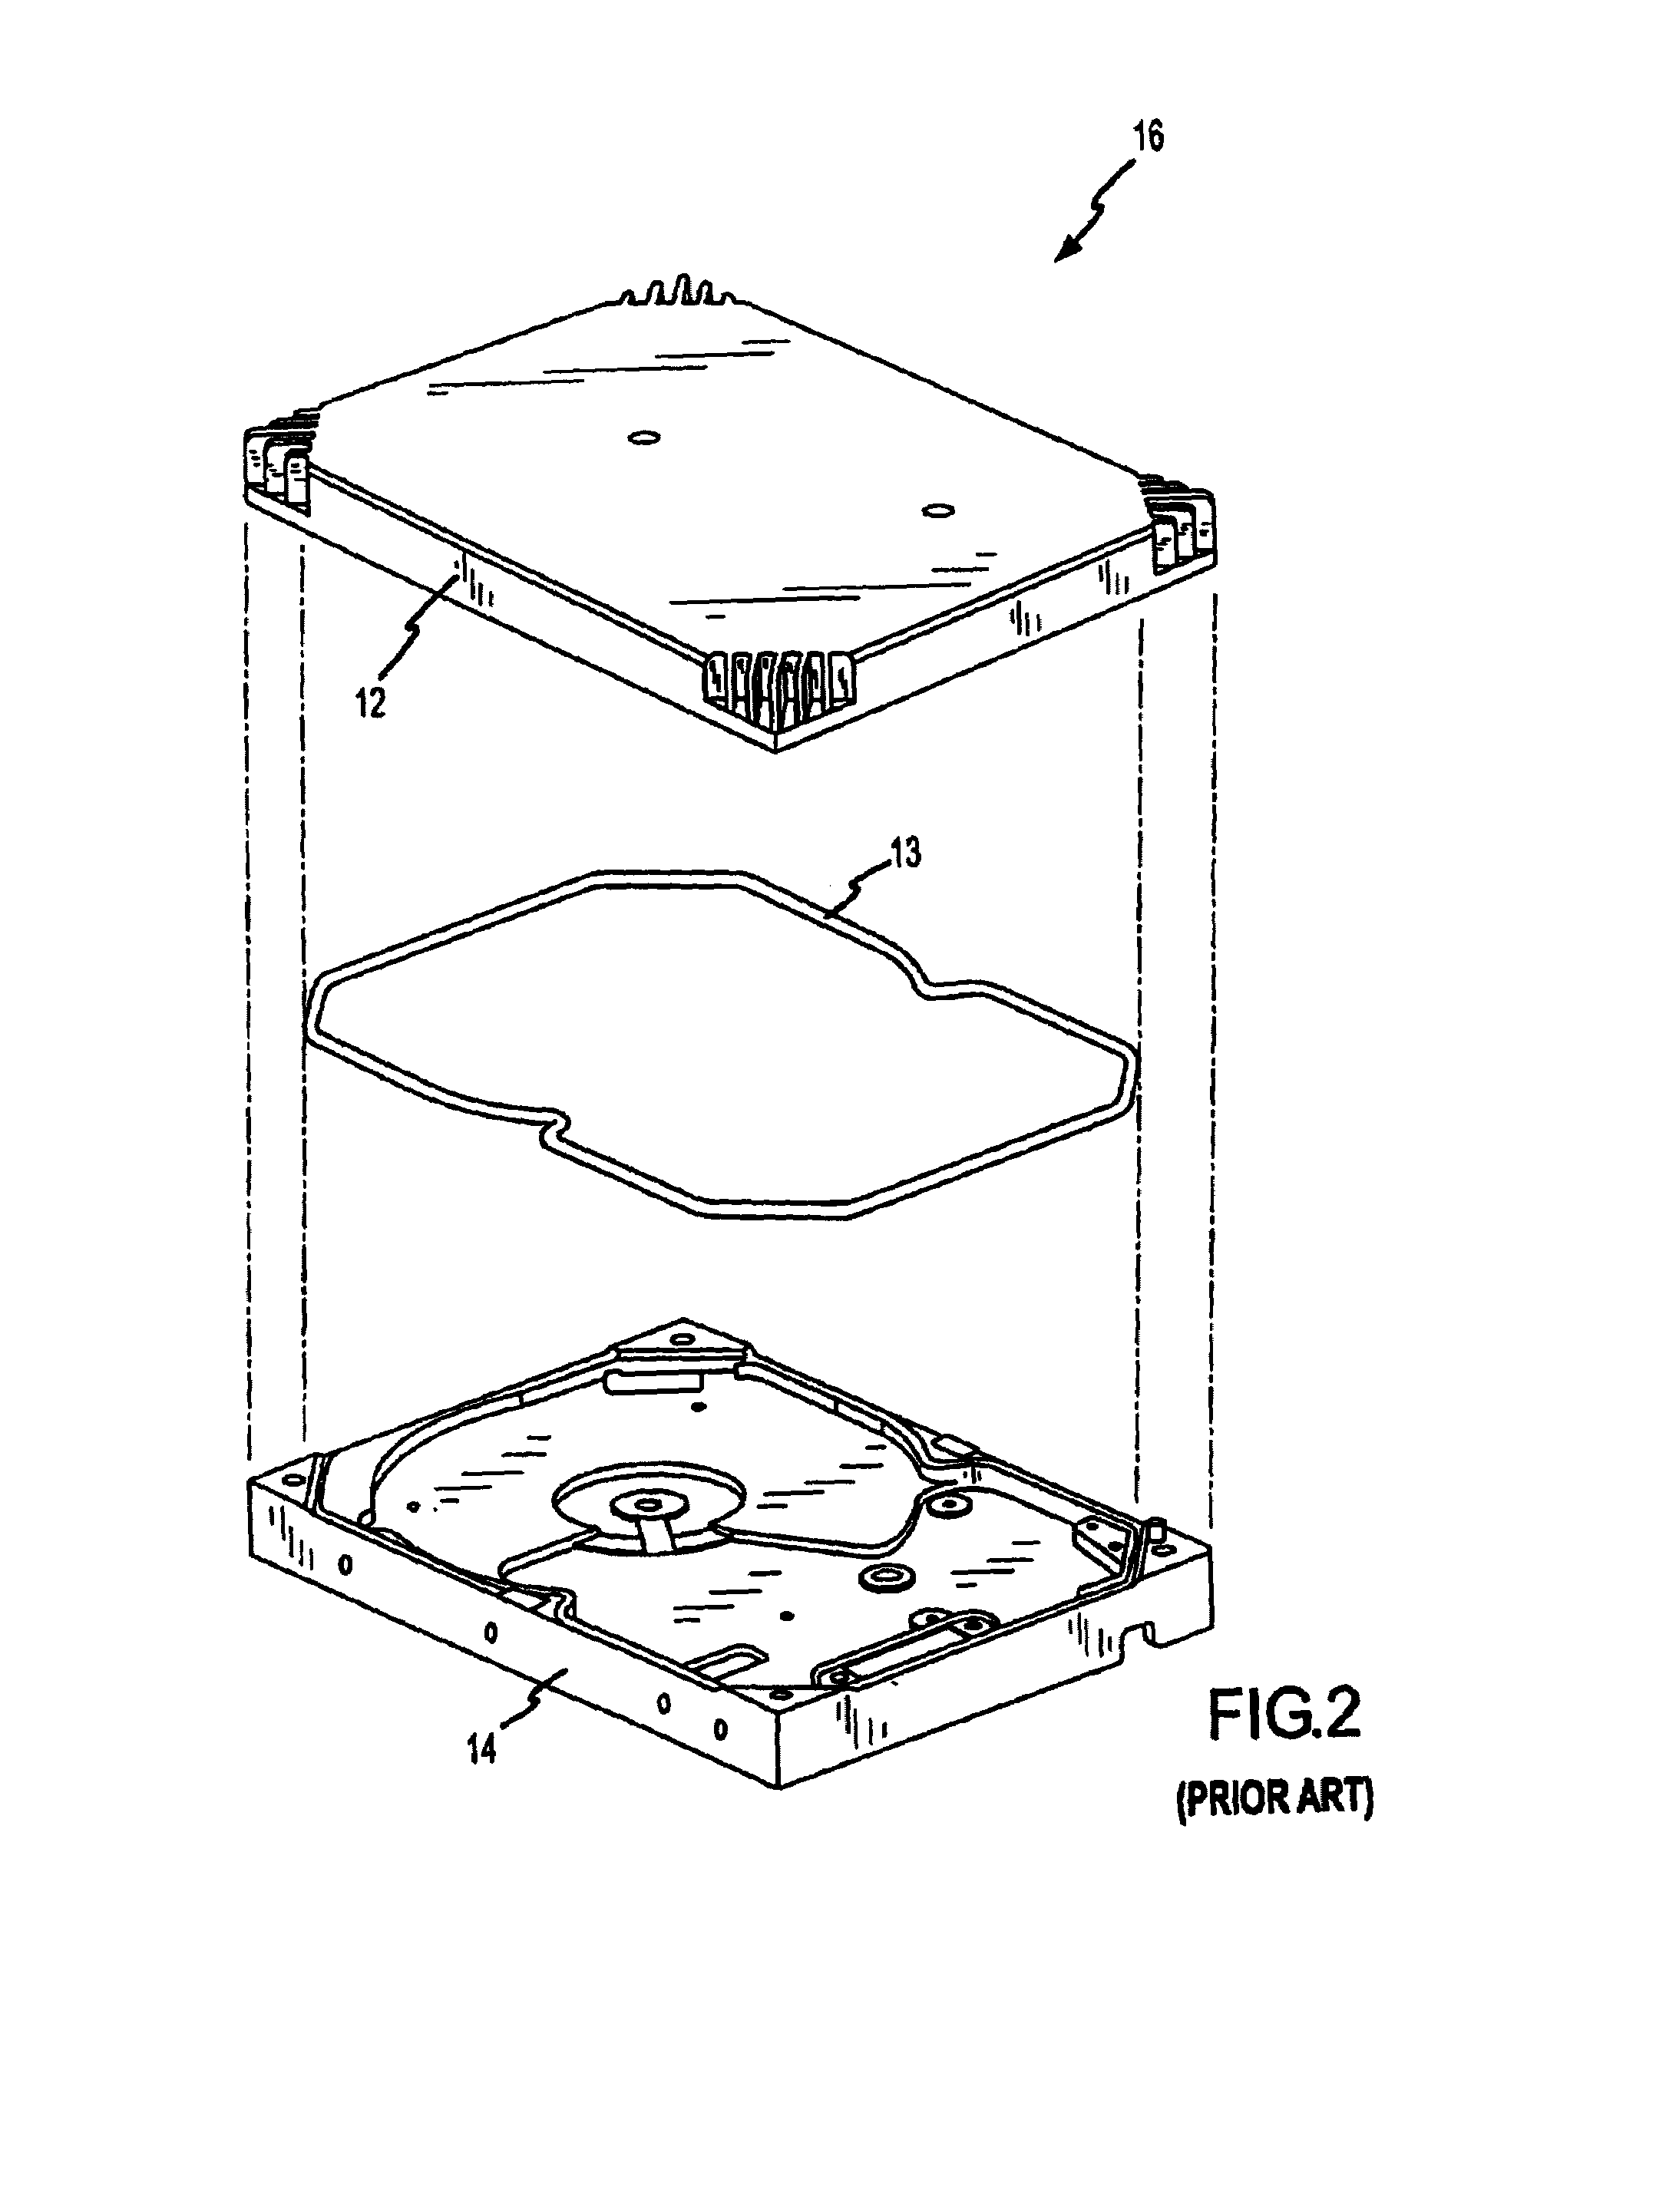 Disk drive head resetting system using slider heater